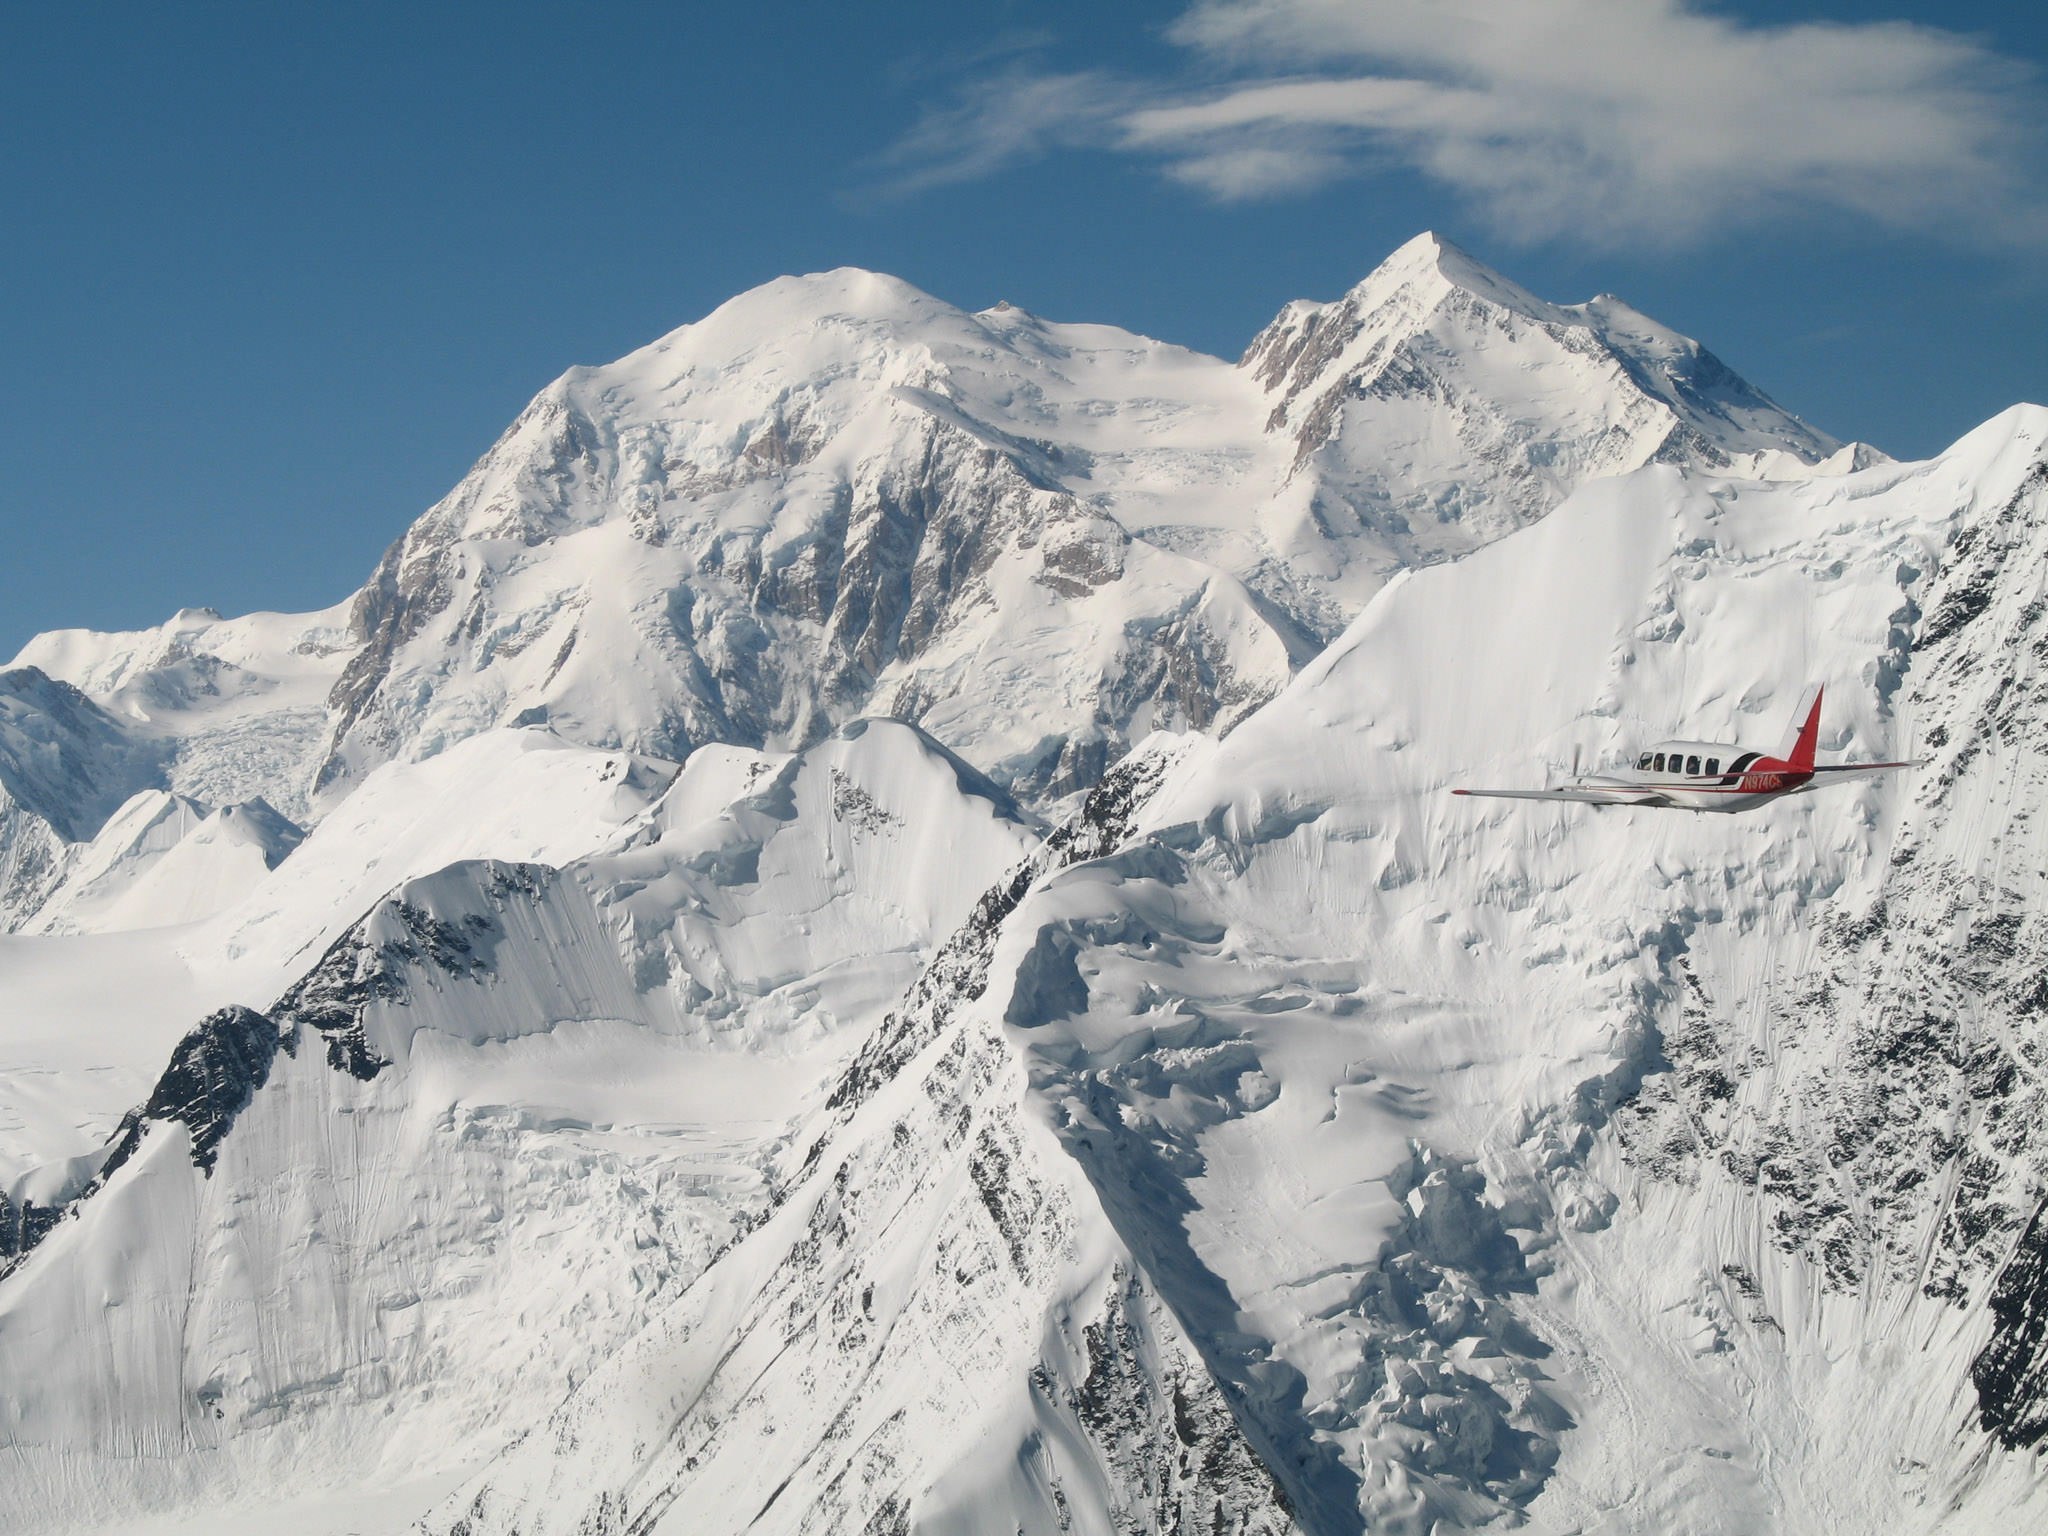 Denali Air soars in front of the face of Mt. Denali.